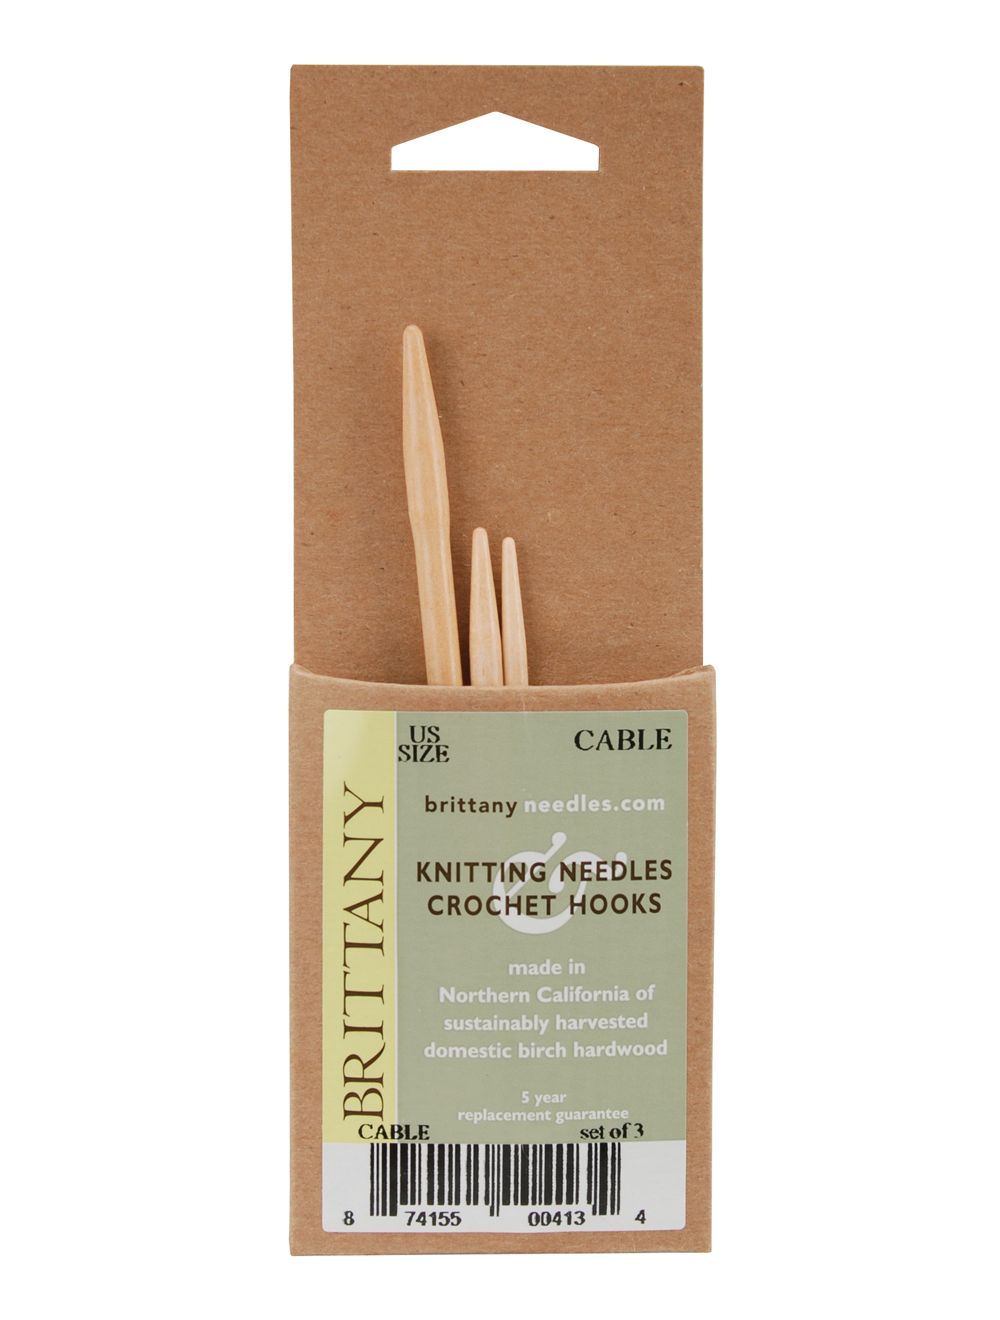 Brittany Cable Knitting Needles 3.75 3/Pkg-Sizes 2.5/3mm, 4/3.5mm & 7/4.5mm  - 874155004134